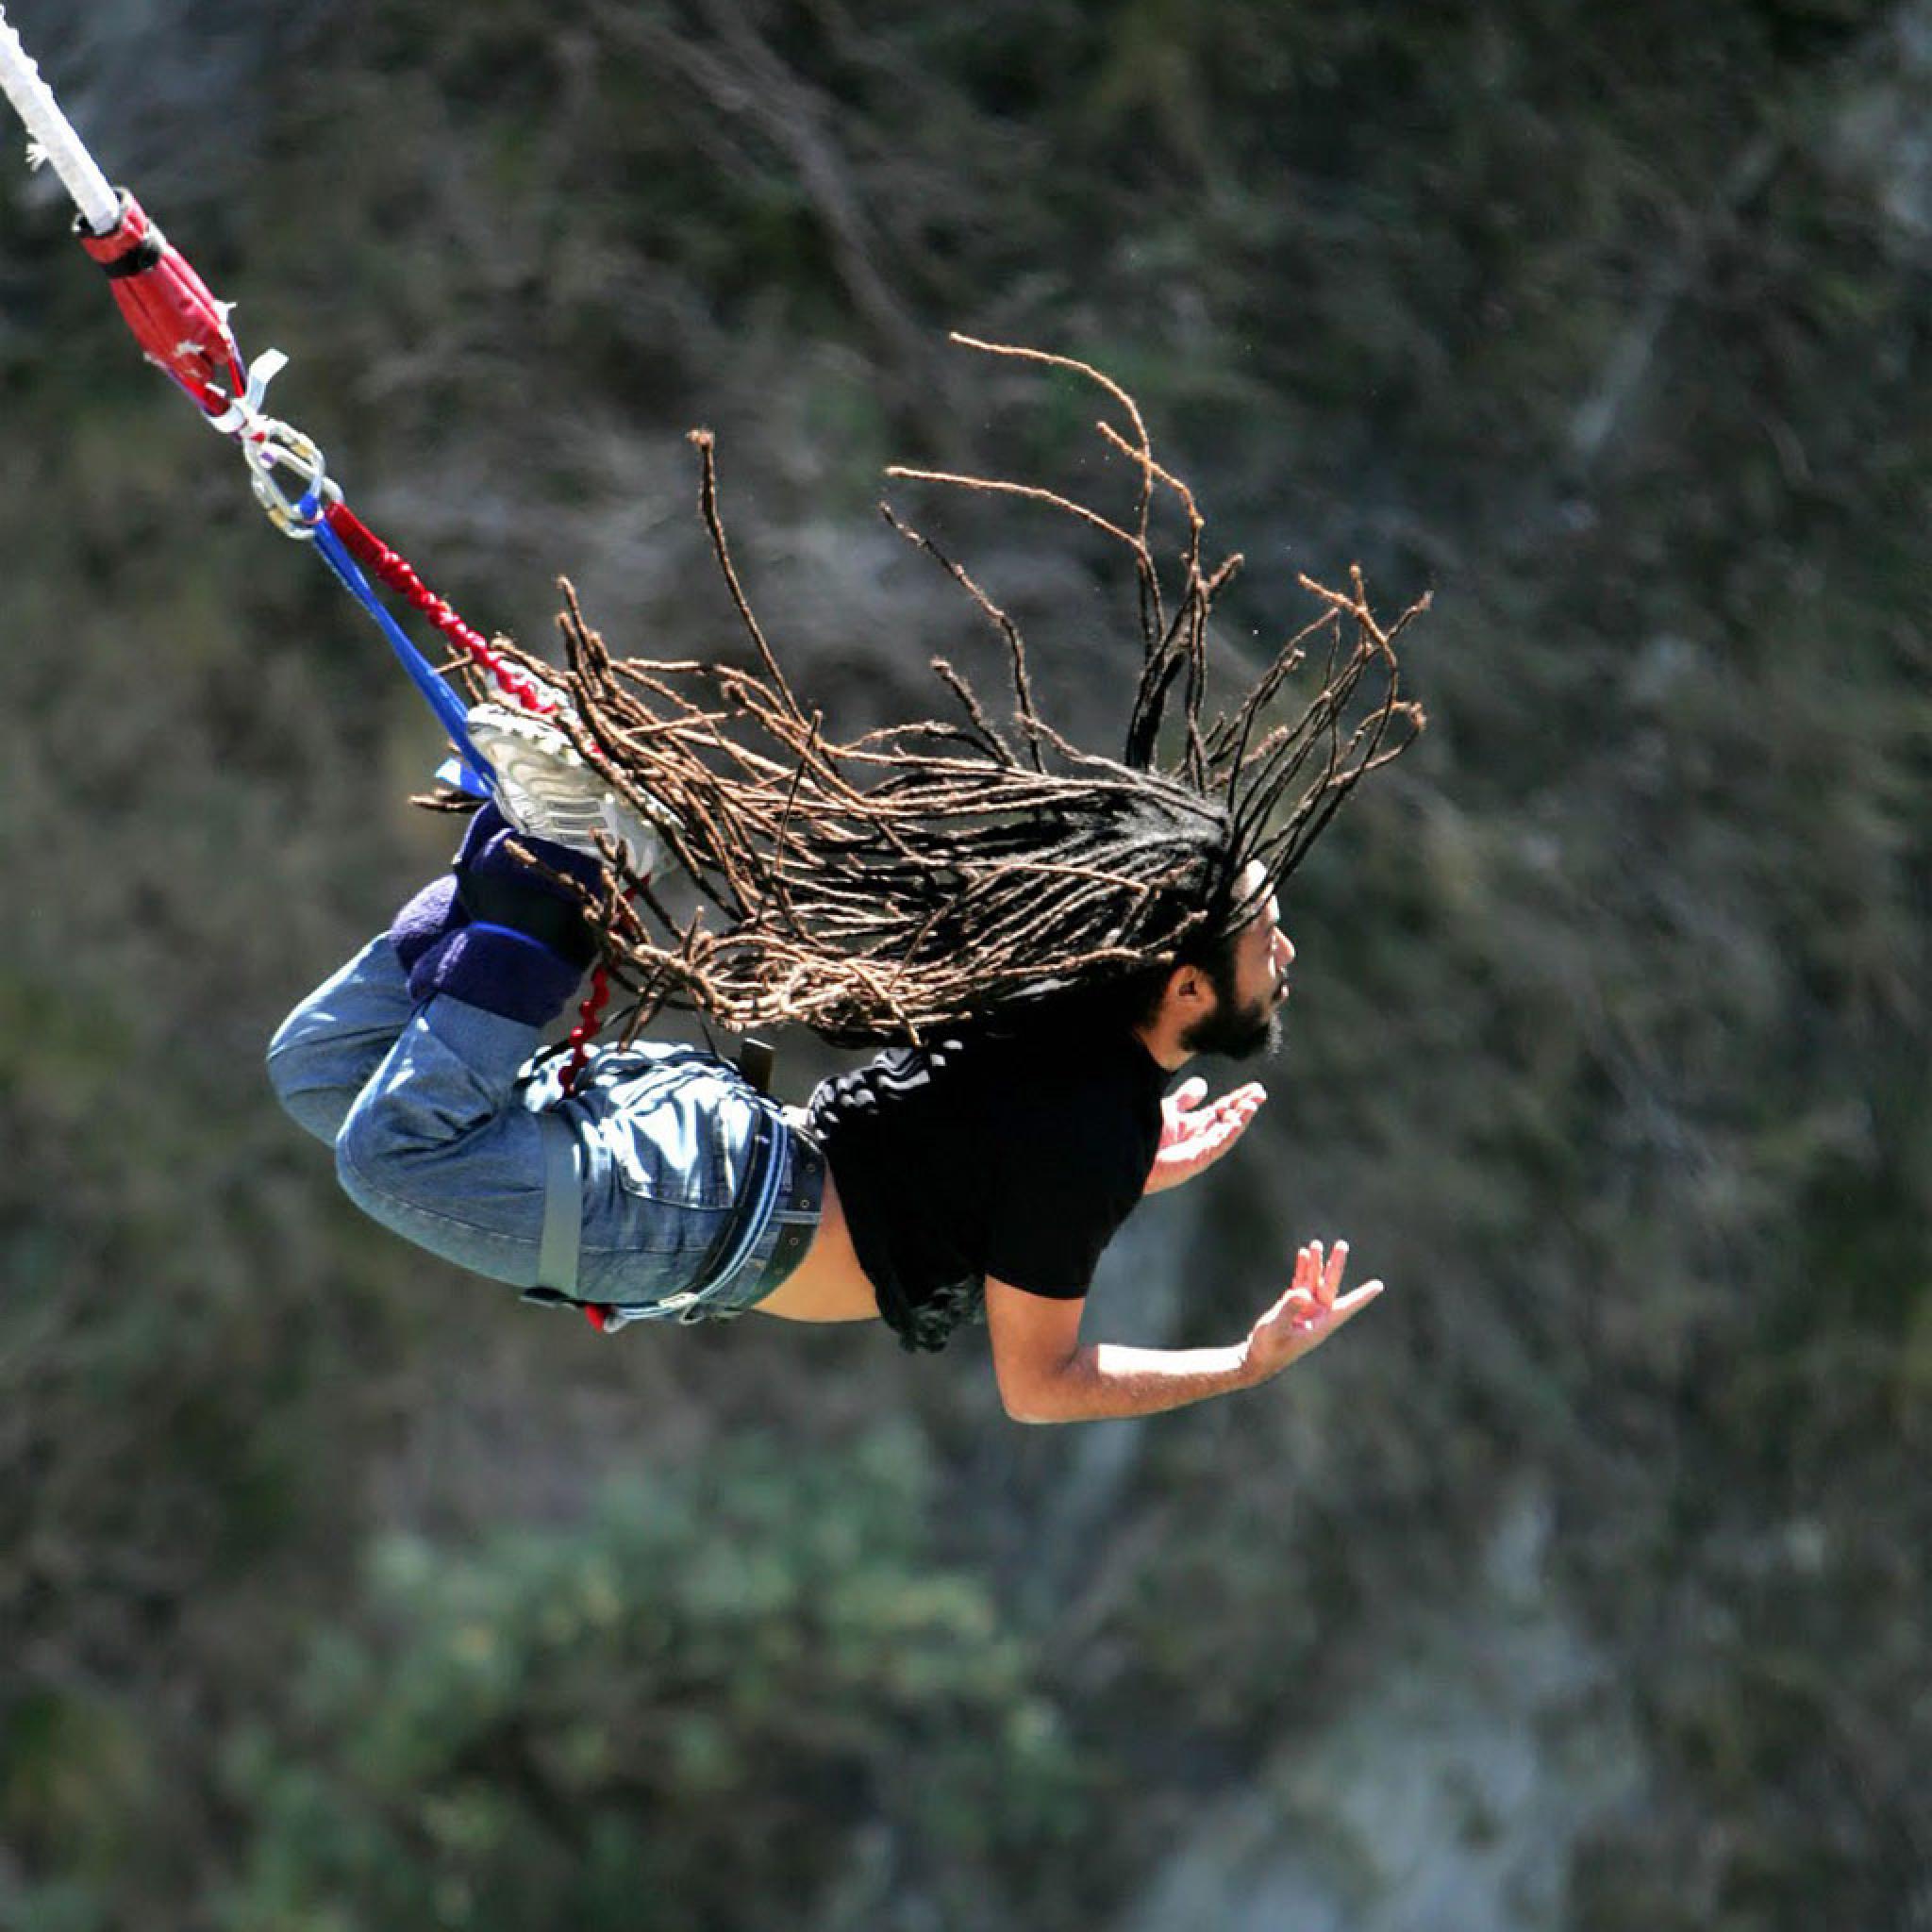 Bungee Jumping Wallpapers - Wallpaper Cave